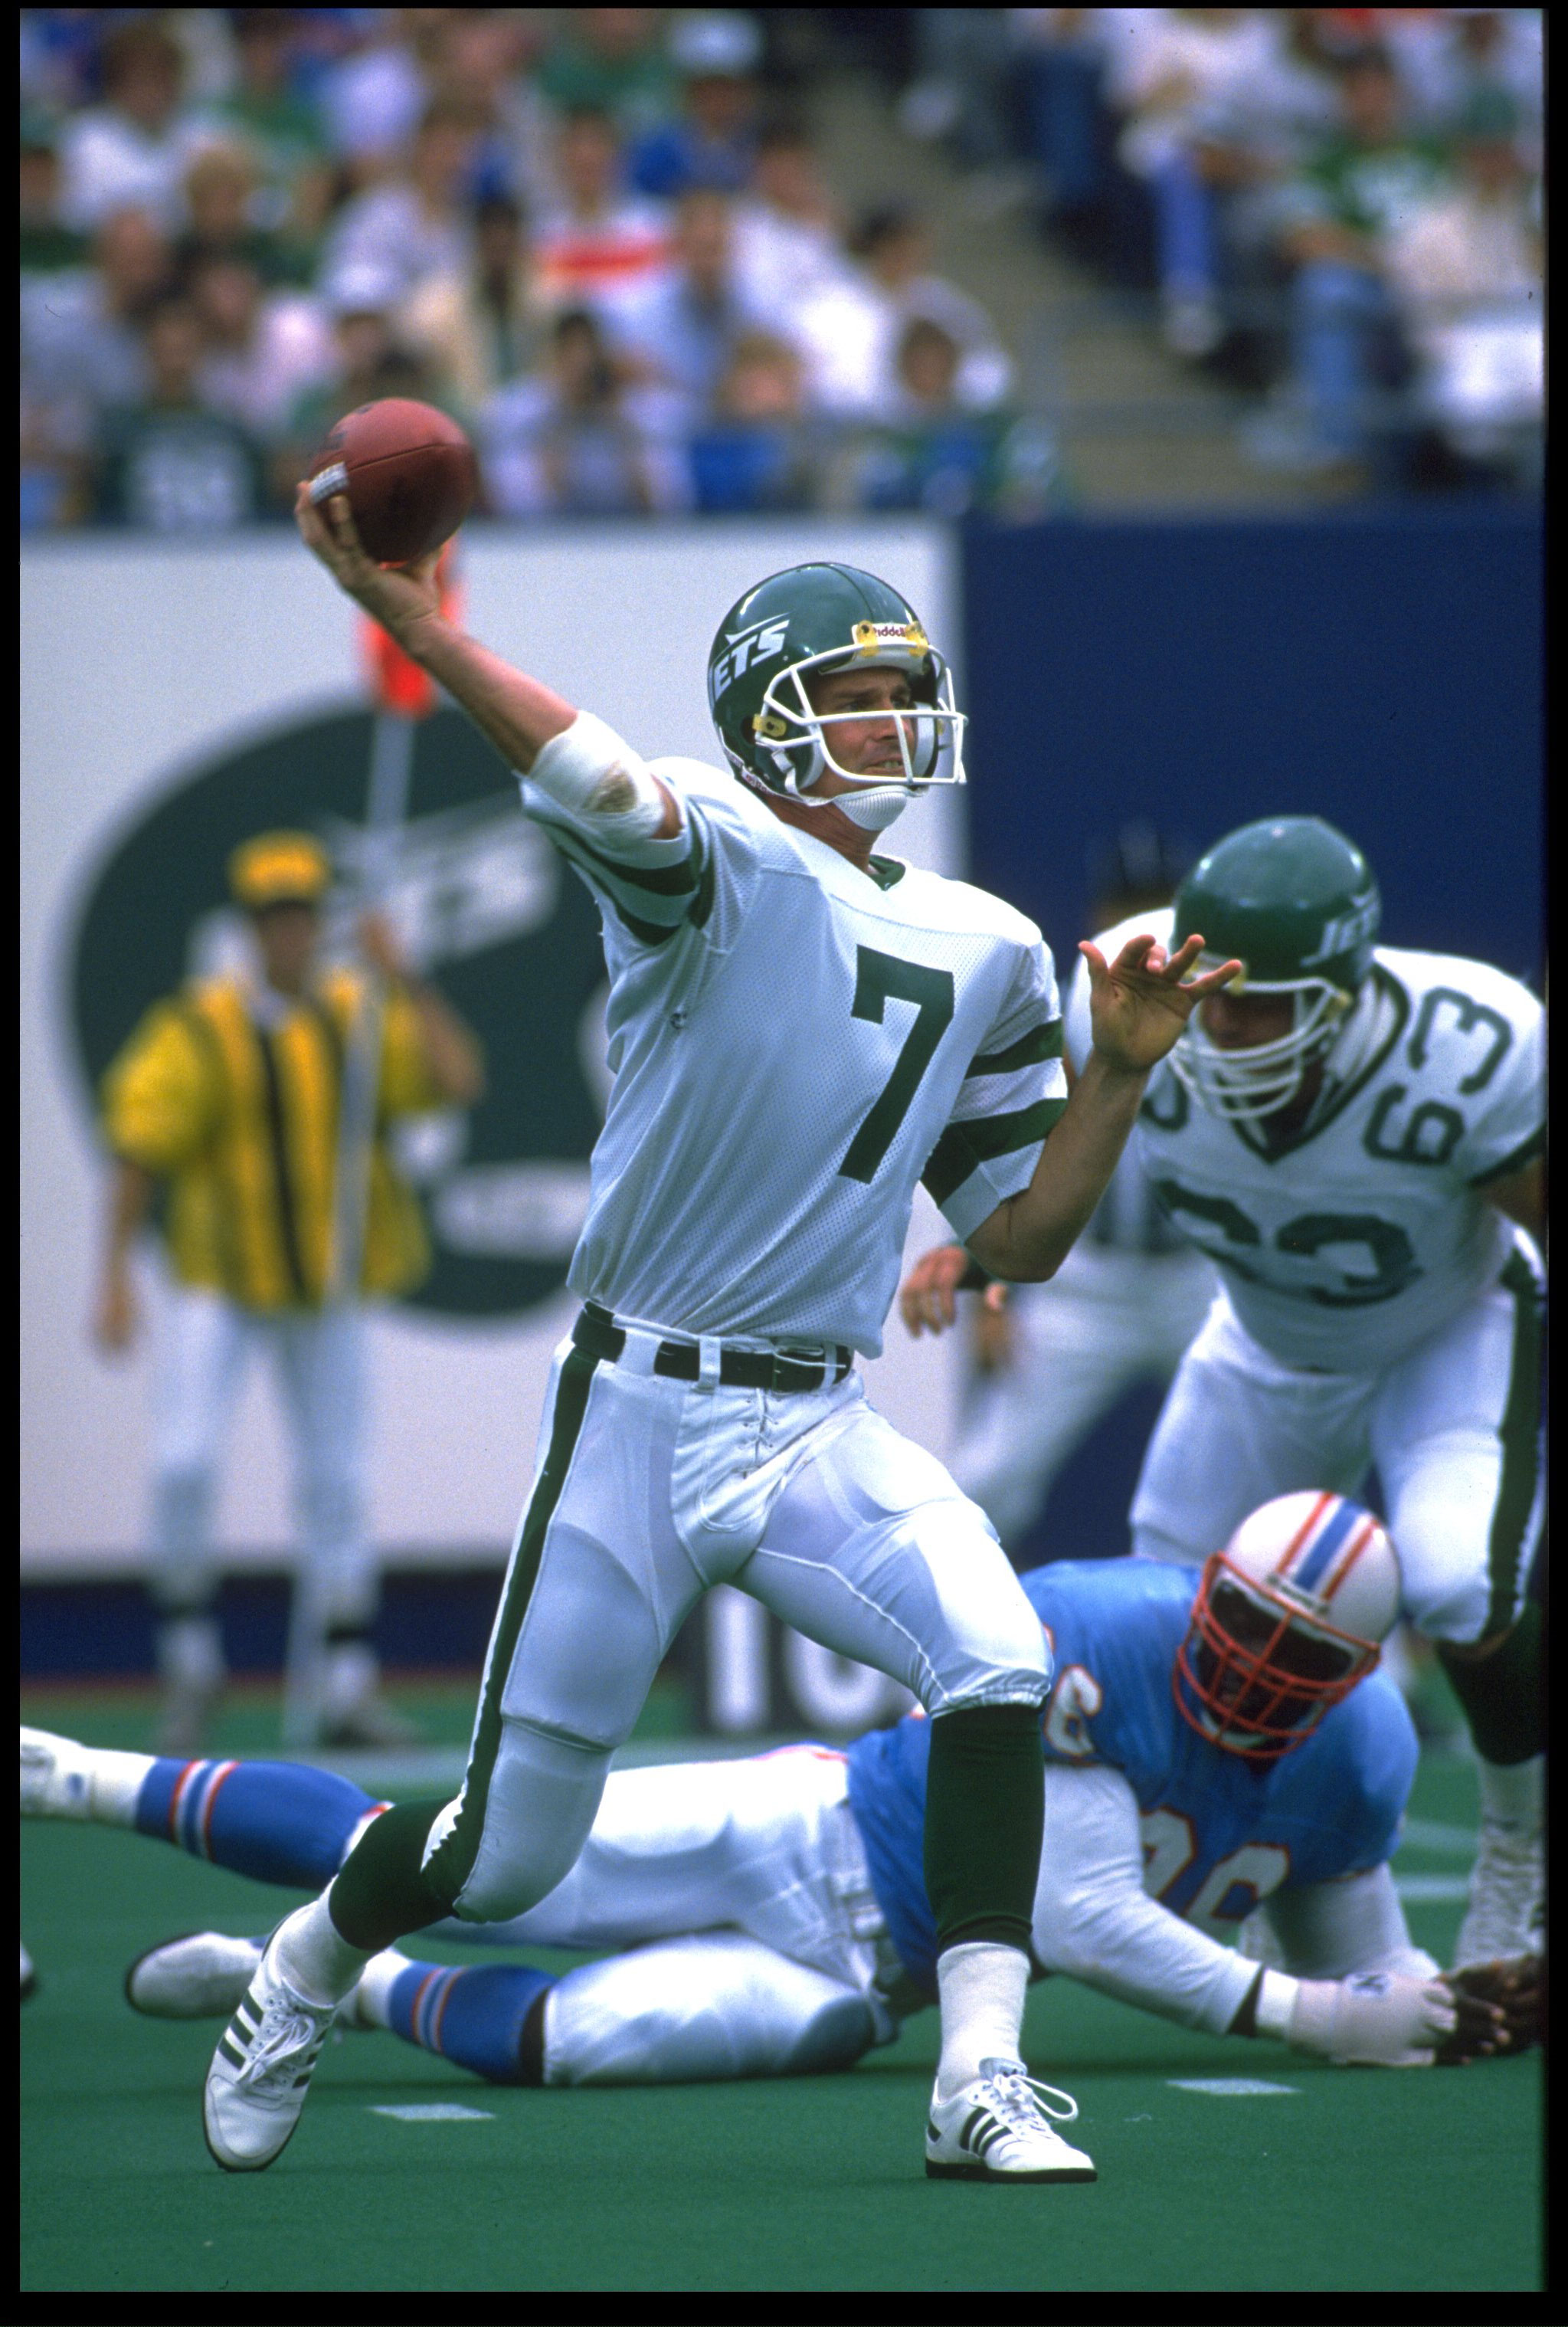 18 SEP 1988:  KEN O''BRIEN #7, QUARTERBACK OF THE NEW YORK JETS, FIRES A PASS DURING THEIR 45-3 ROMP OVER THE HOUSTON OILERS AT GIANTS STADIUM IN EAST RUTHERFORD, NEW JERSEY.  MANDATORY CREDIT:  RICK STEWART/ALLSPORT